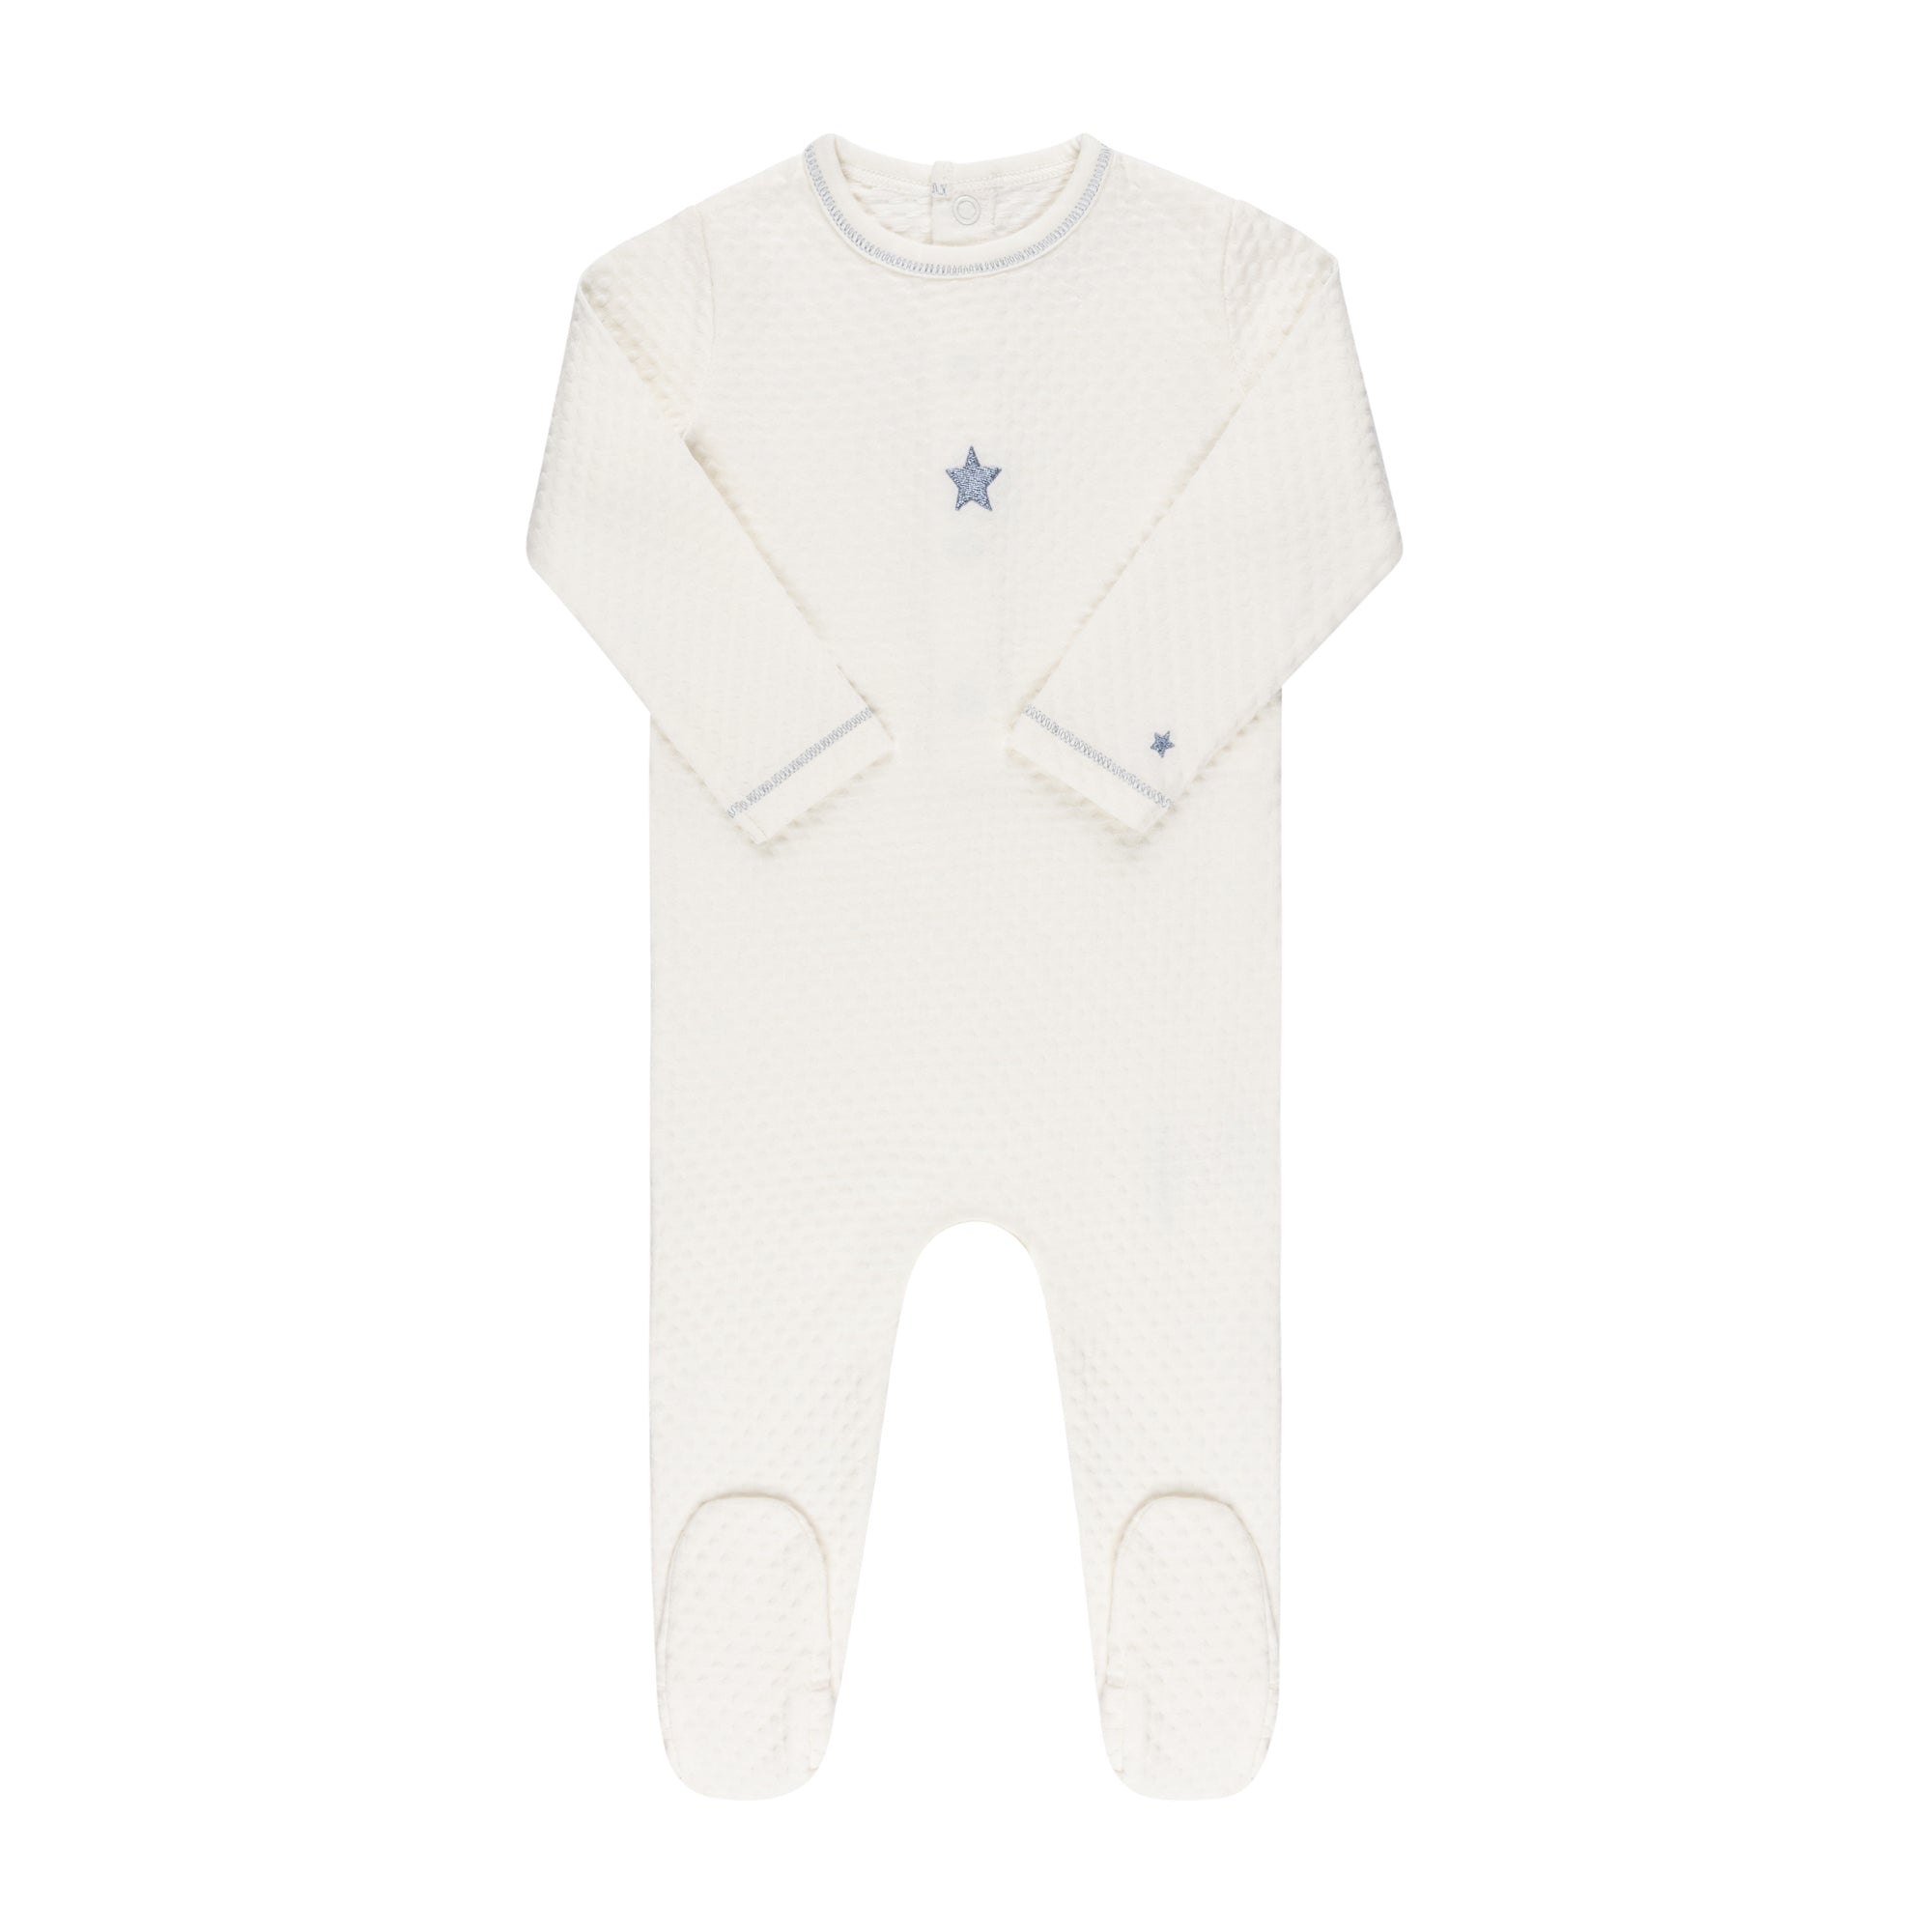 Elys & Co Cotton Embroidered Star Footie